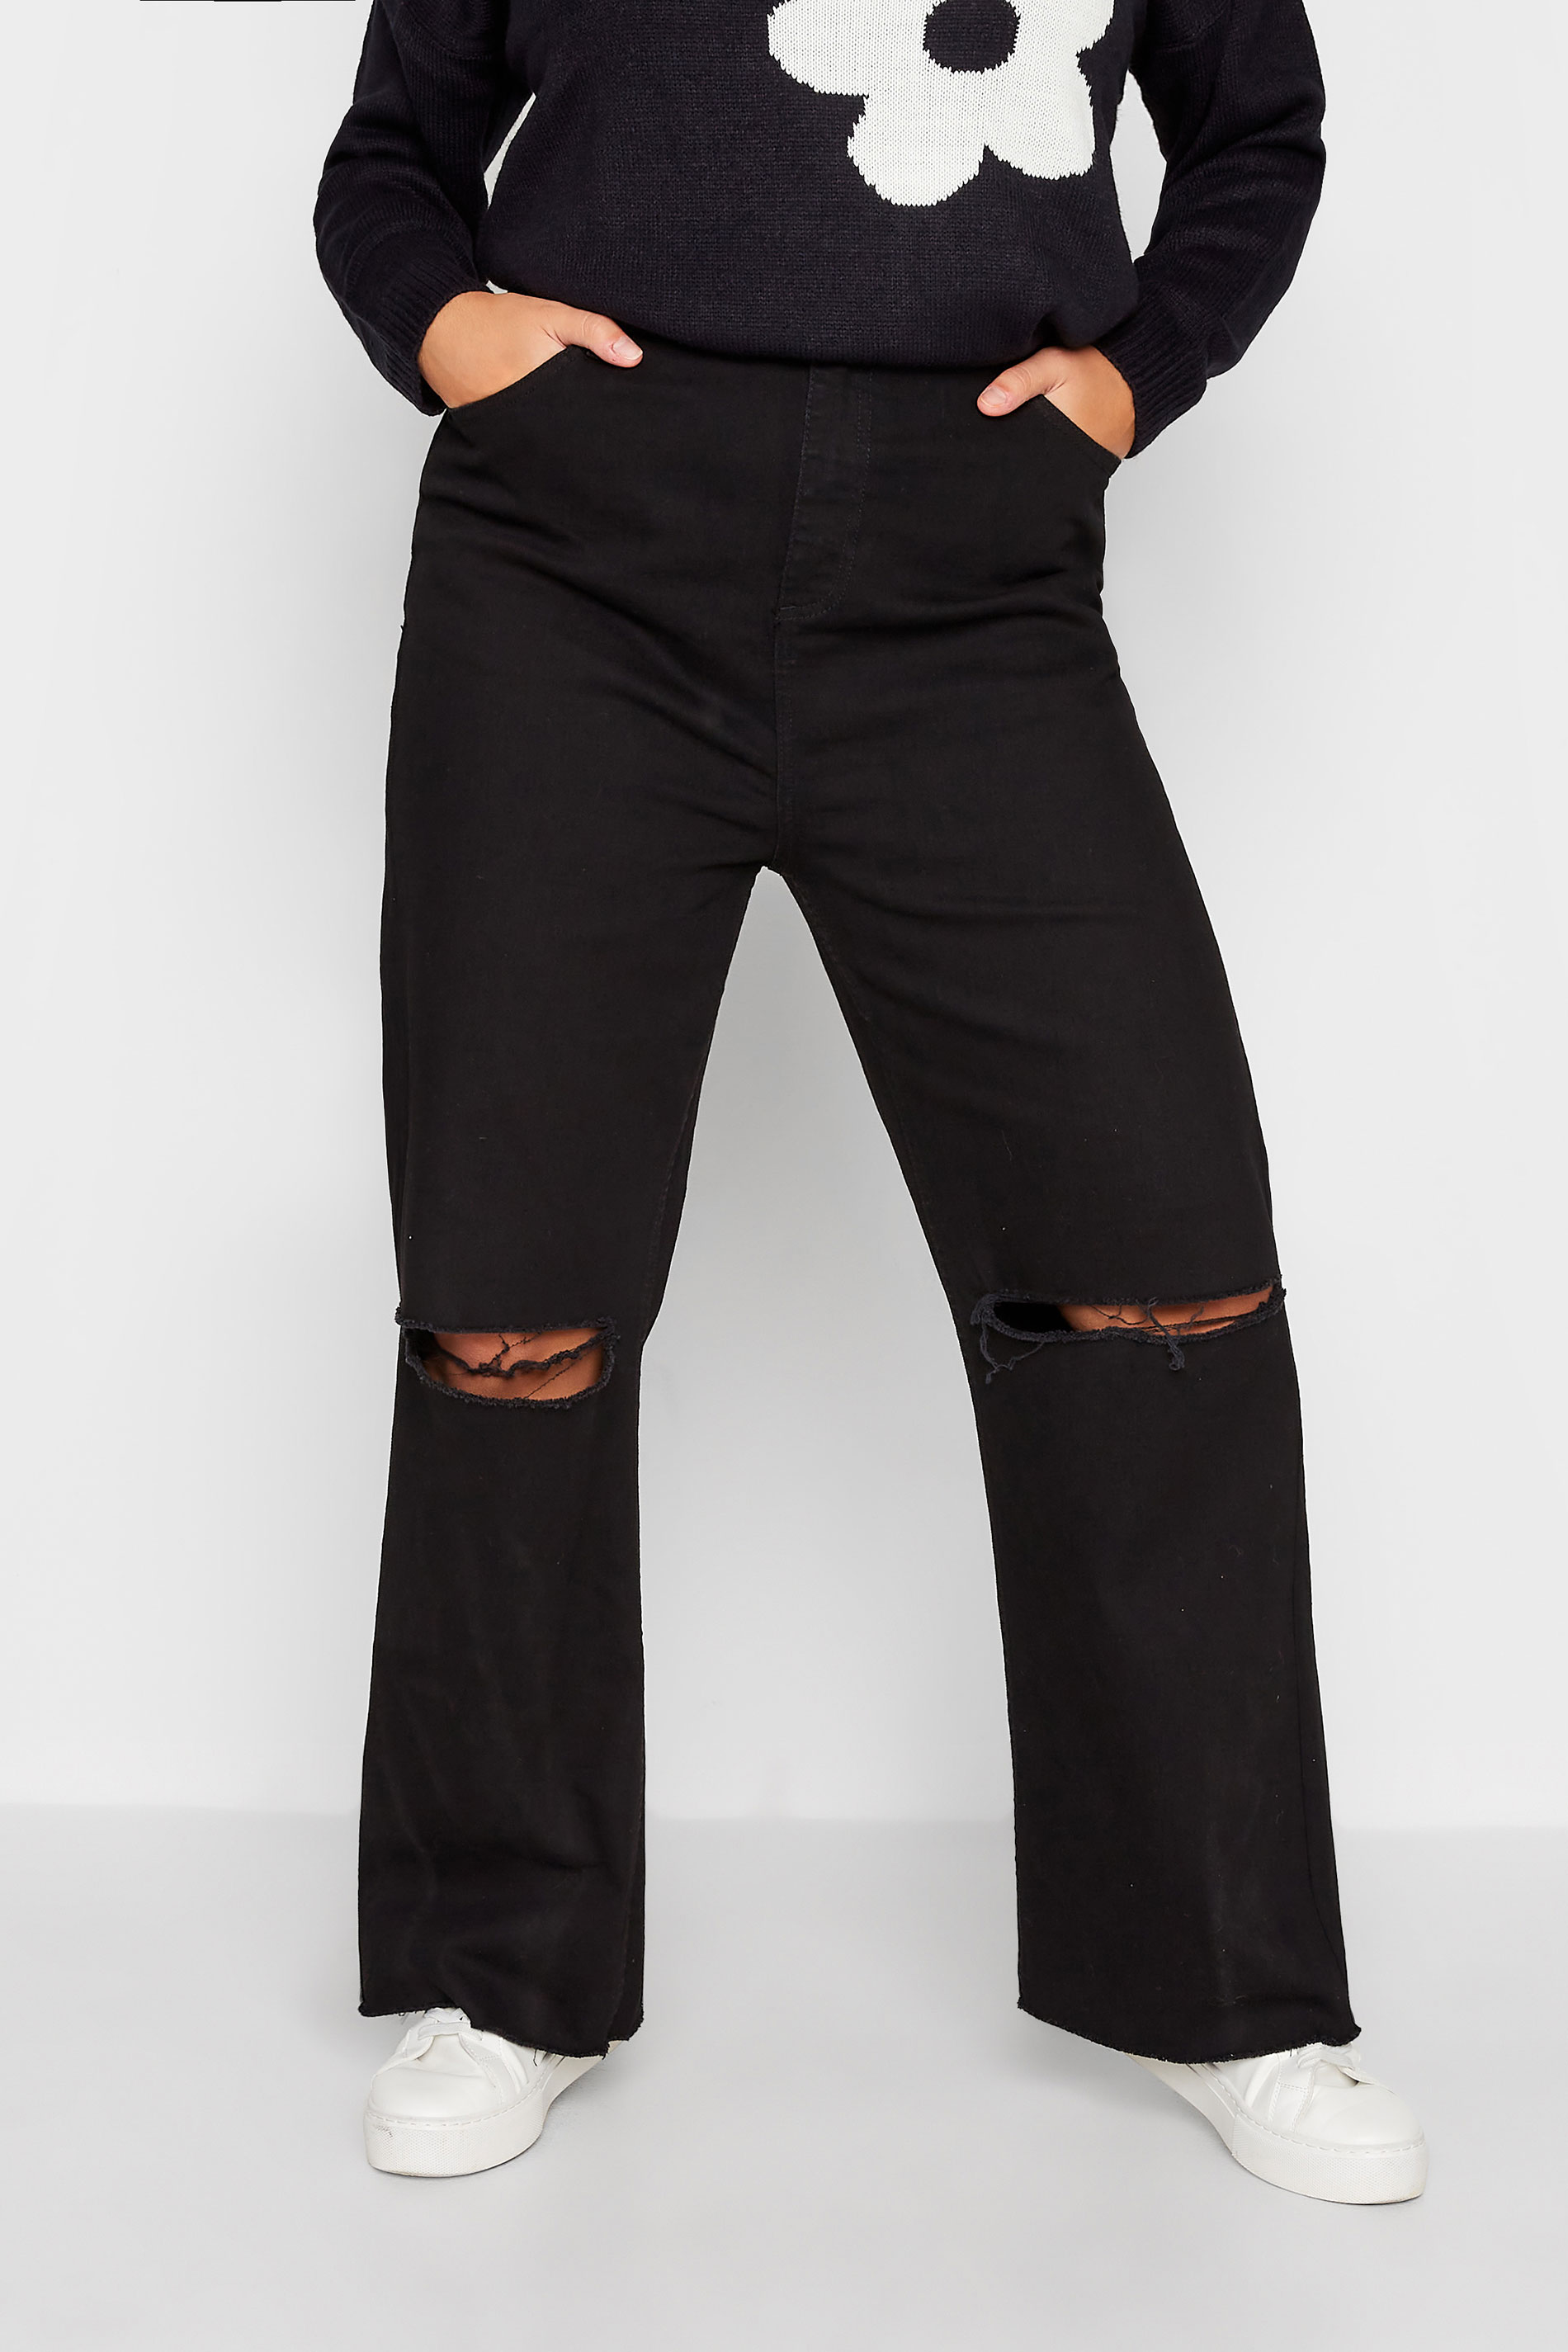 Plus Size Black Ripped Wide Leg Stretch Jeans | Yours Clothing  1